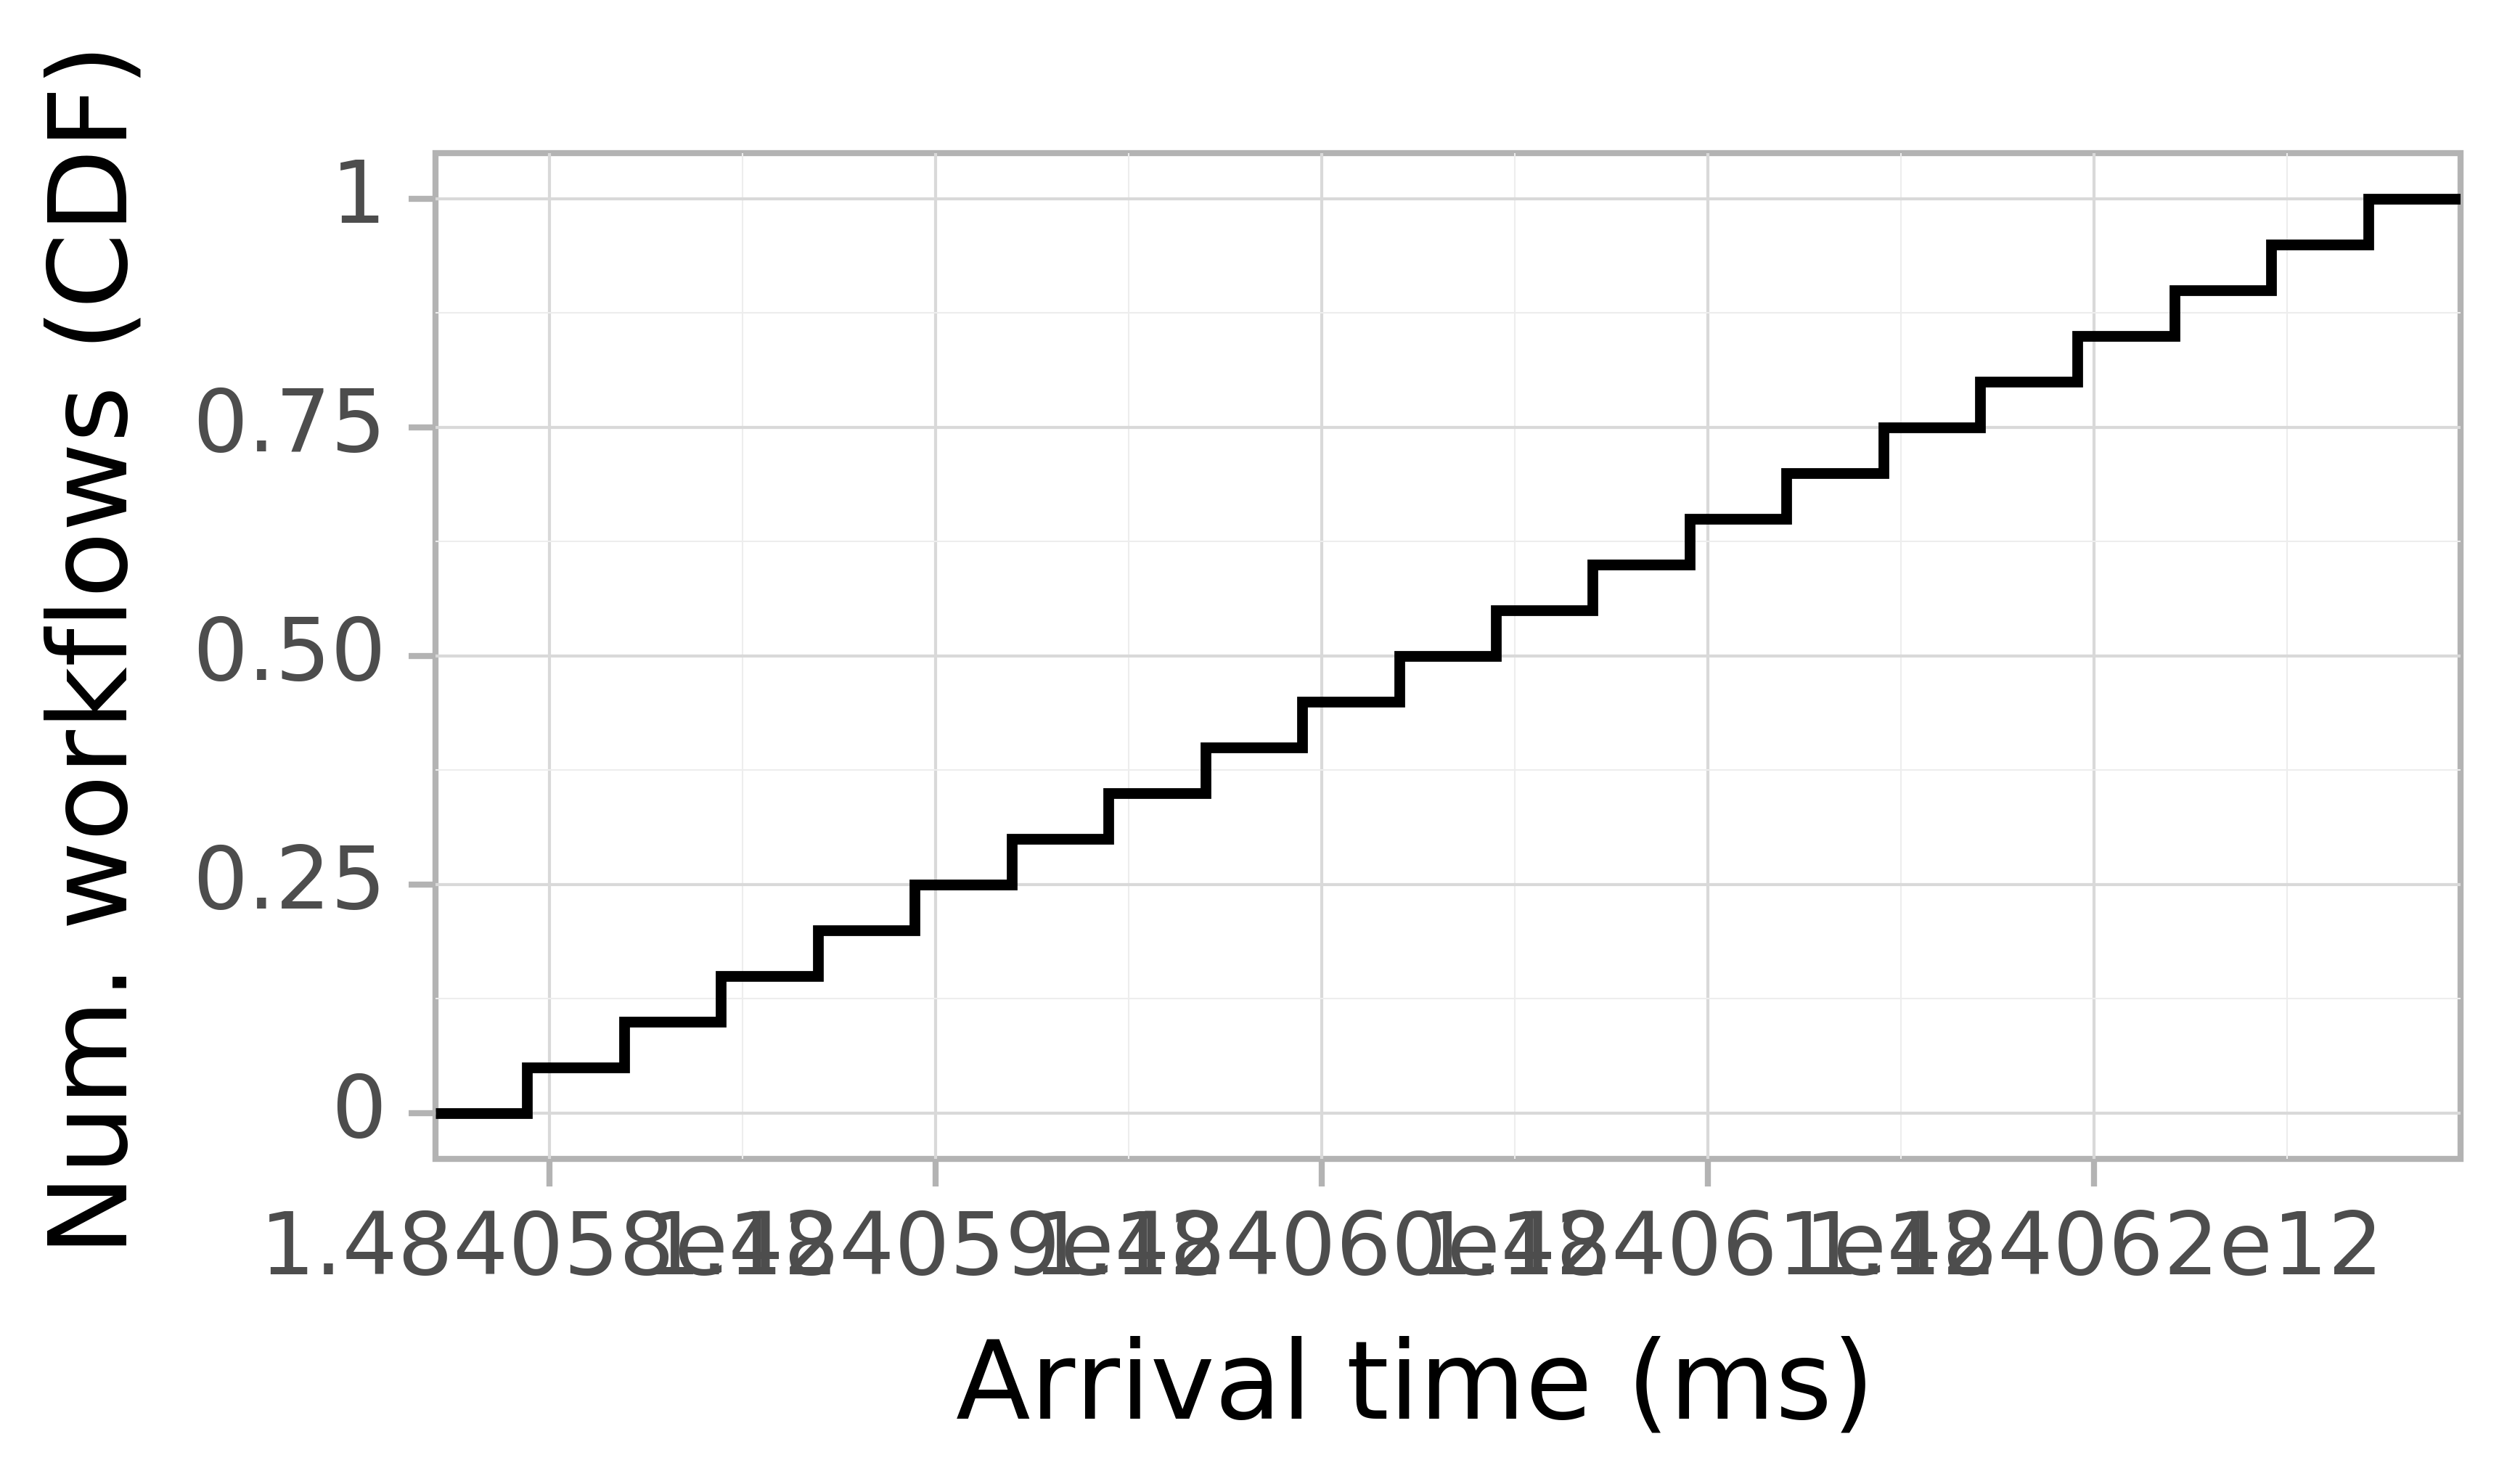 Job arrival CDF graph for the askalon-new_ee4 trace.